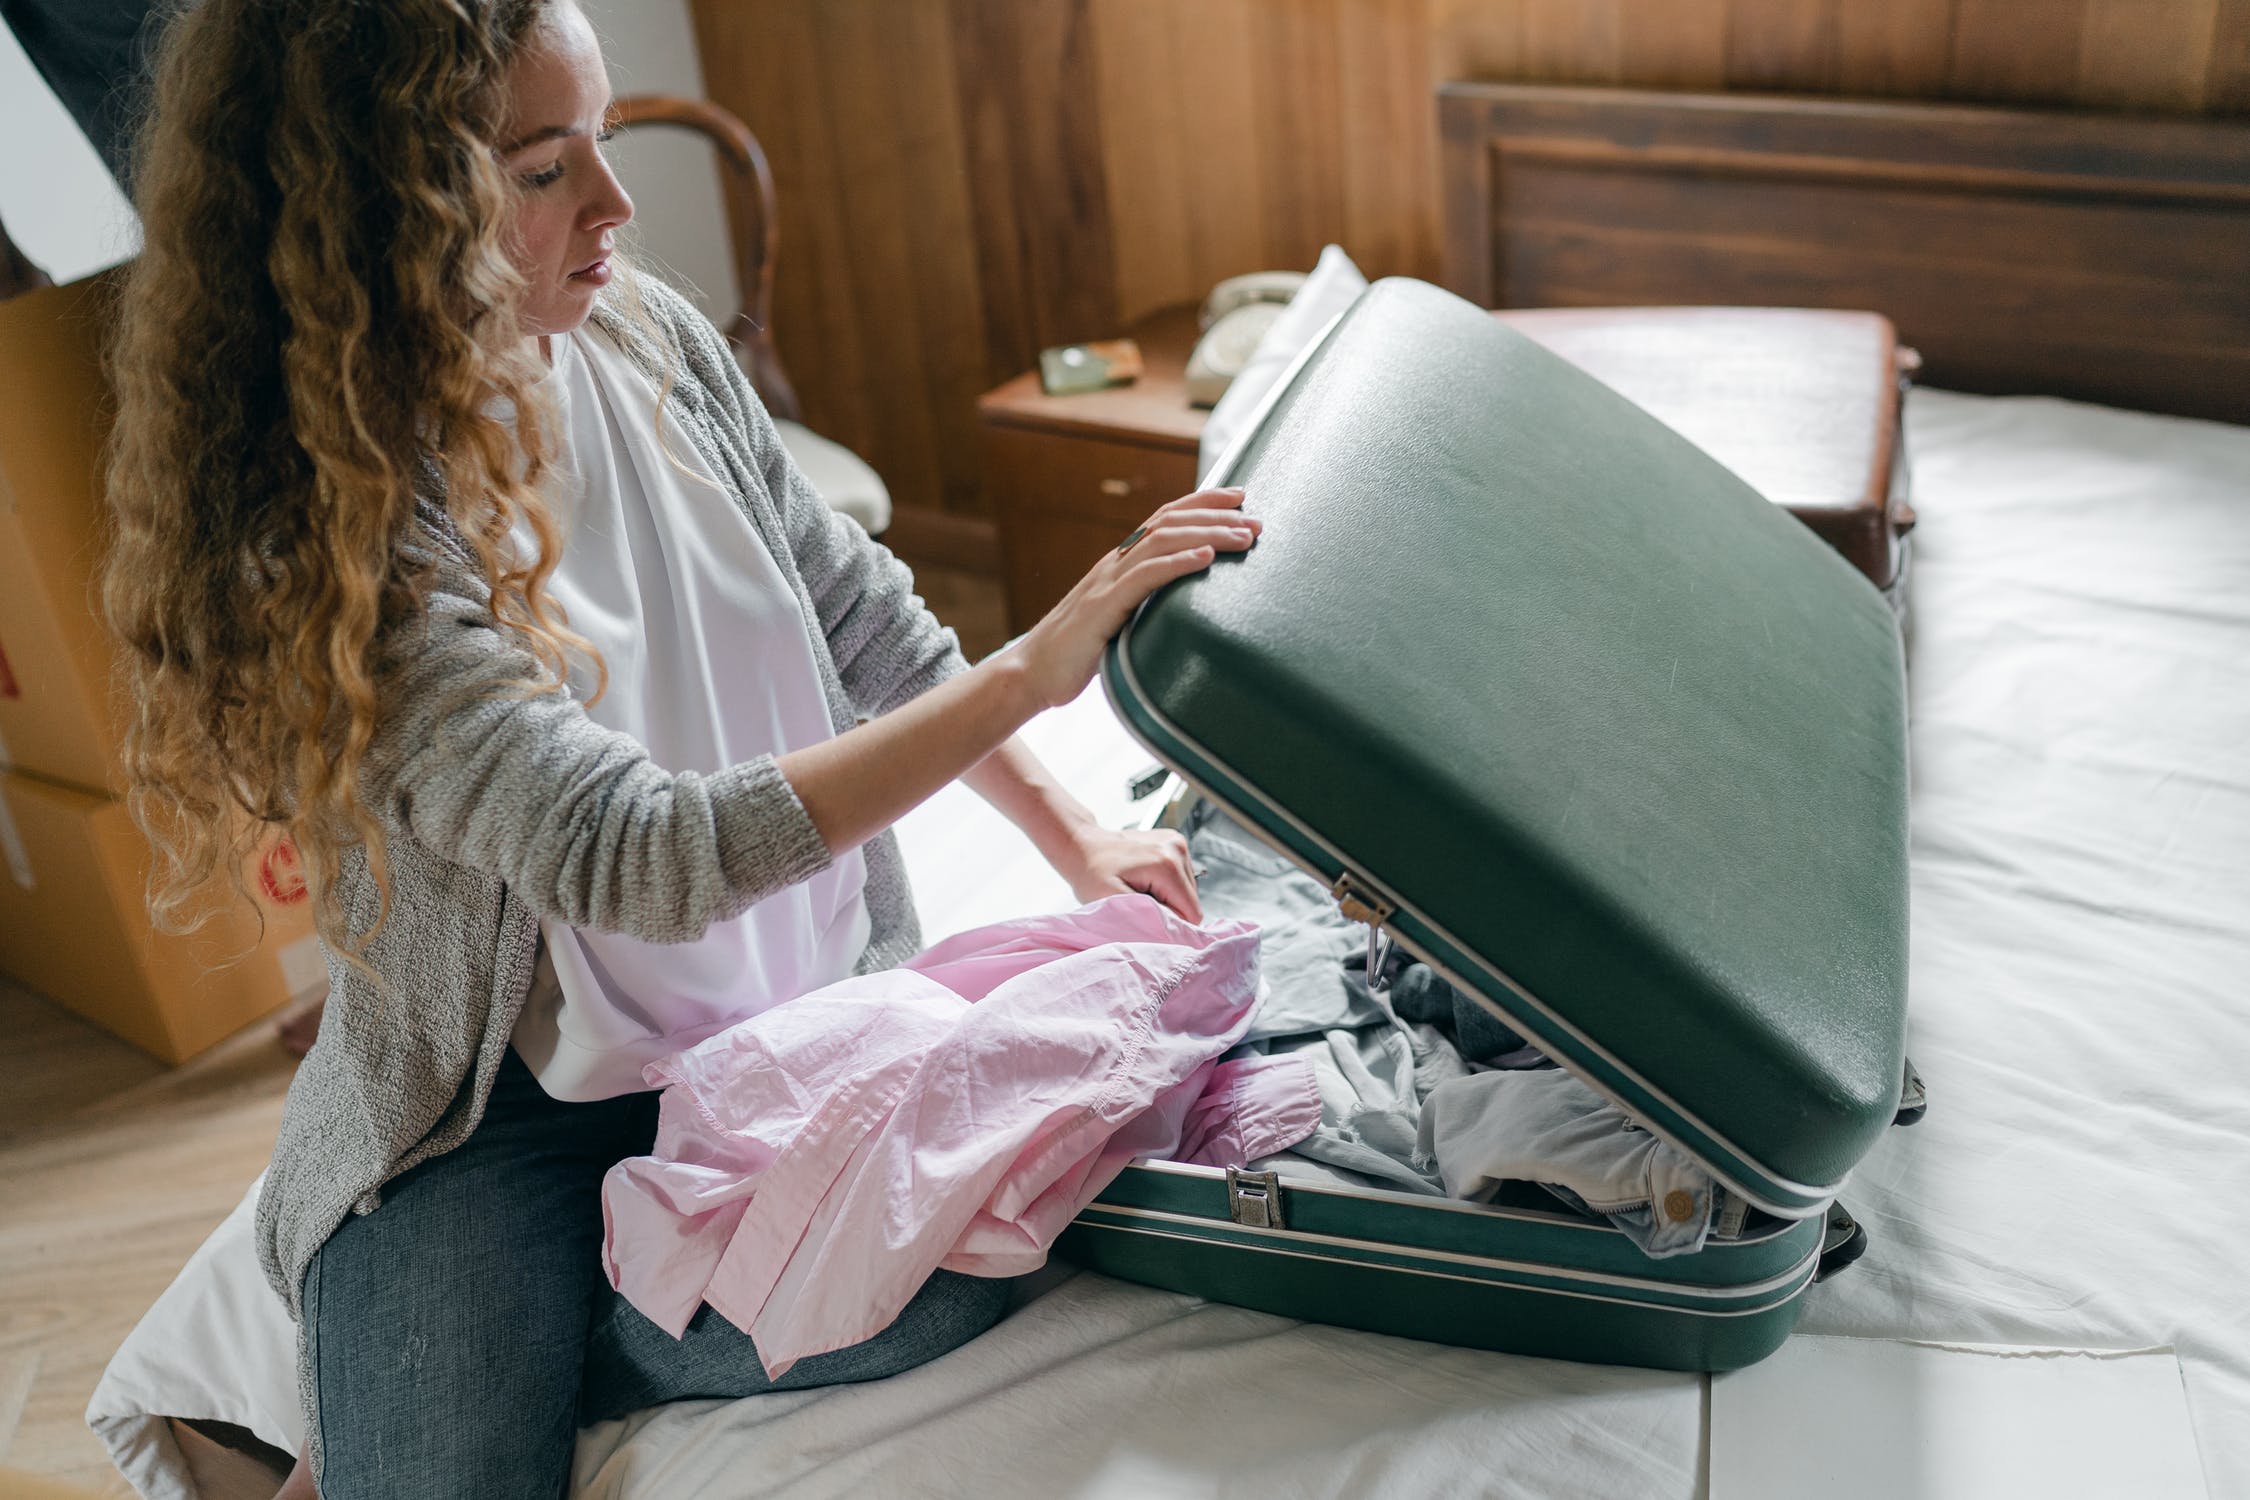 Woman packing a suitcase | Source: Pexels